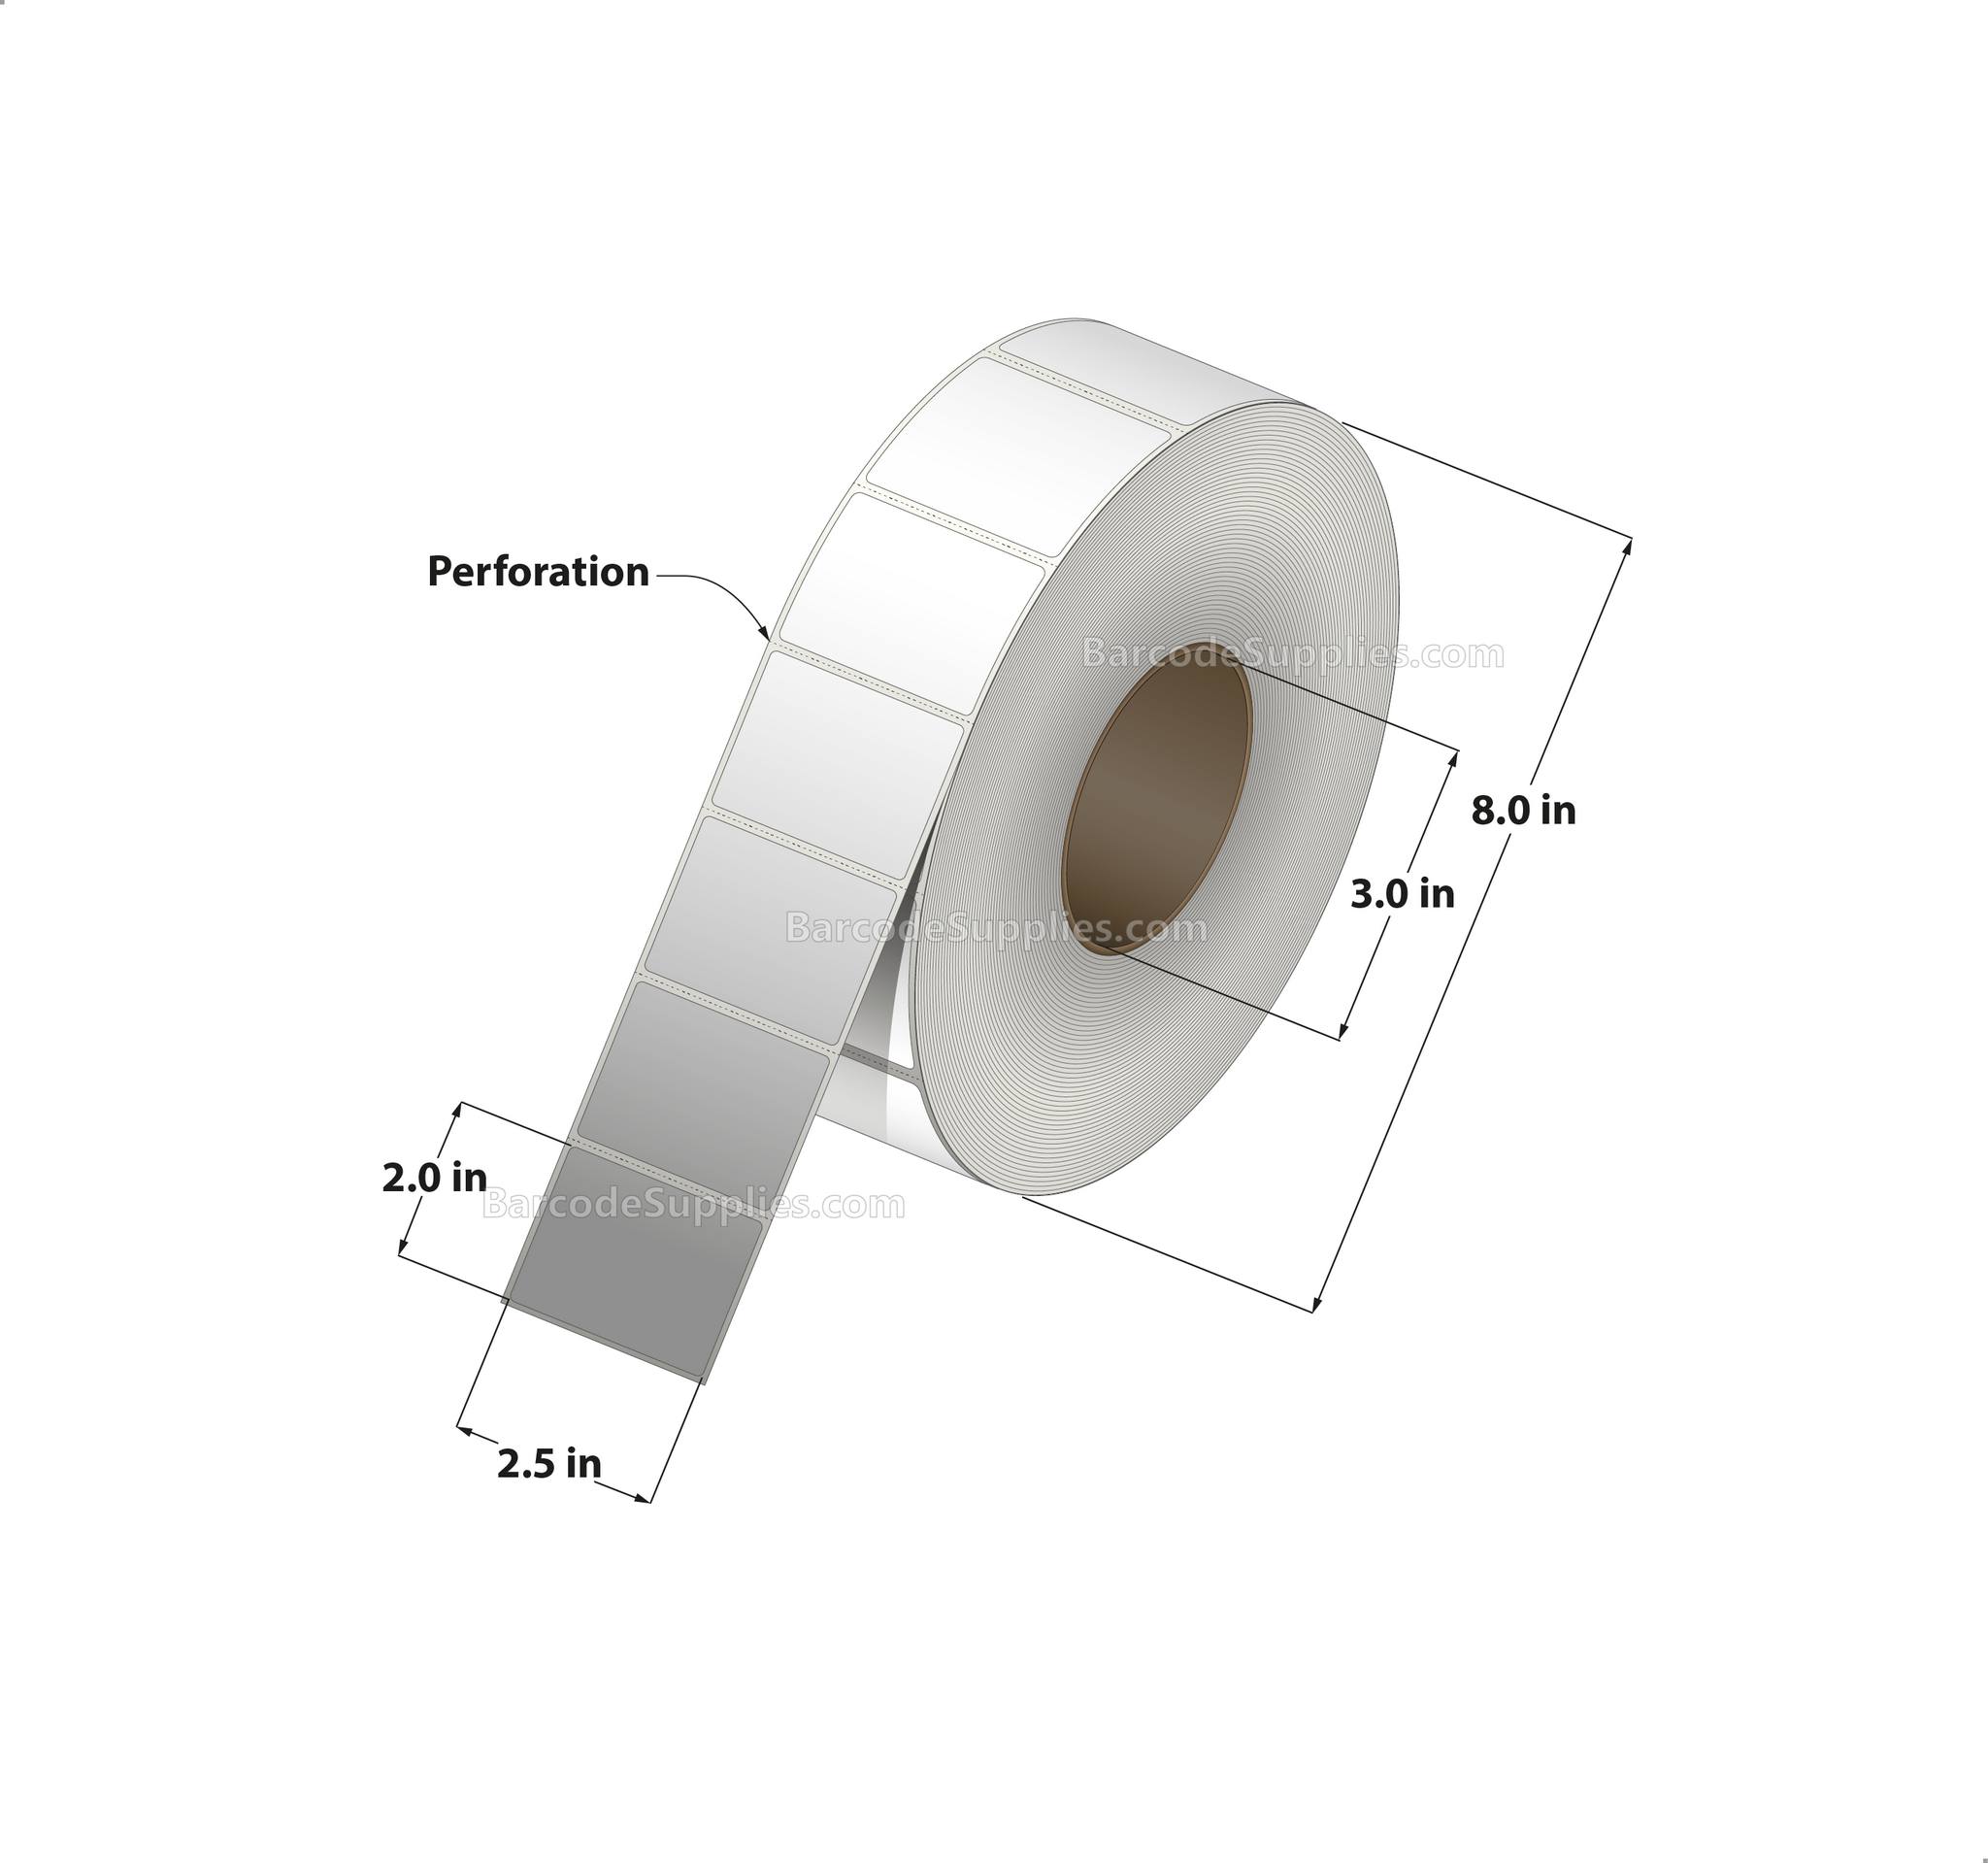 2.5 x 2 Thermal Transfer White Labels With Permanent Adhesive - Perforated - 2900 Labels Per Roll - Carton Of 8 Rolls - 23200 Labels Total - MPN: RT-25-2-2900-3